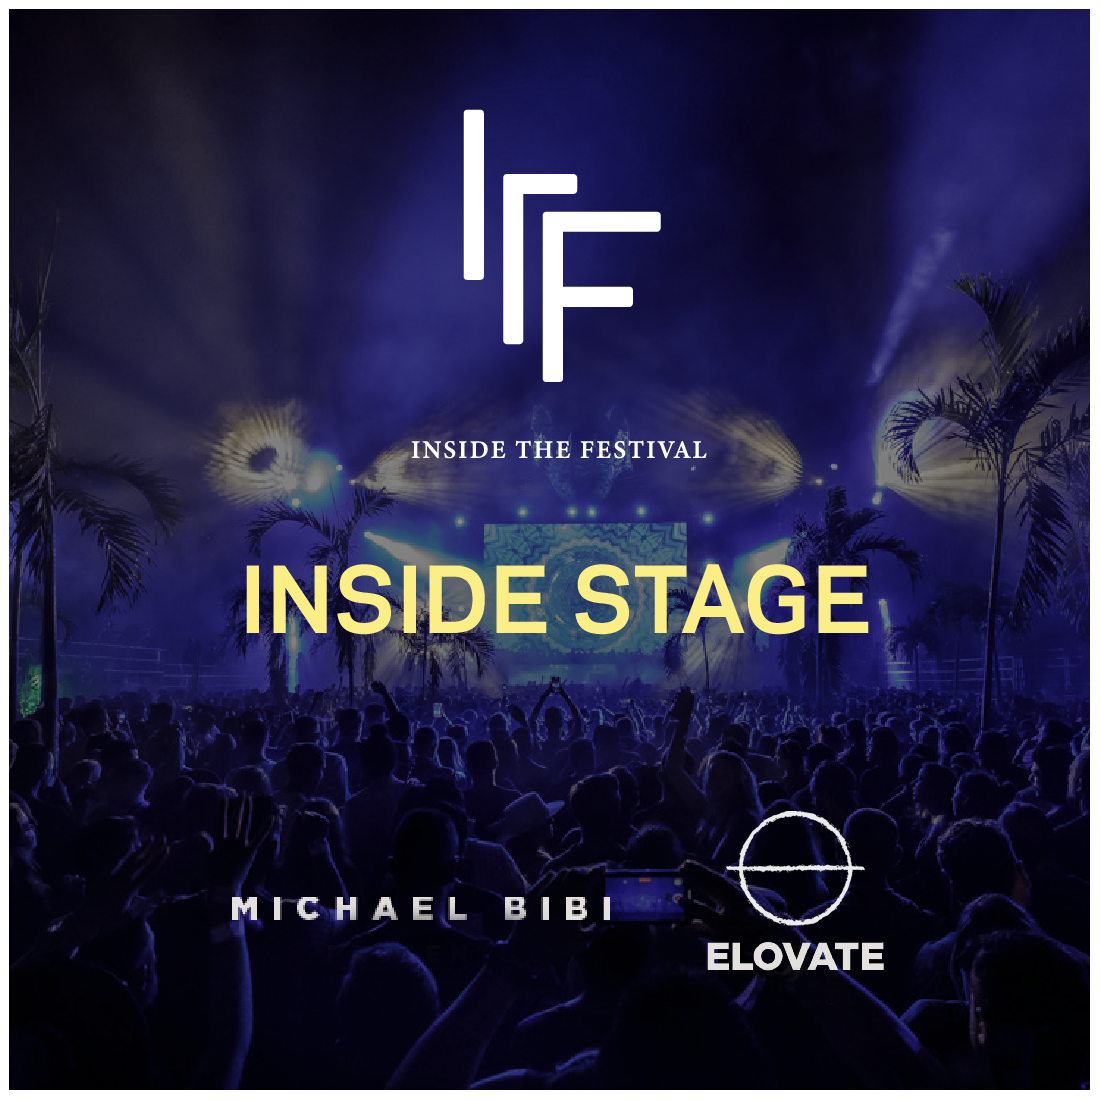 Michael Bibi presents ELOVATE INSIDE STAGE: January 2nd and 3rd